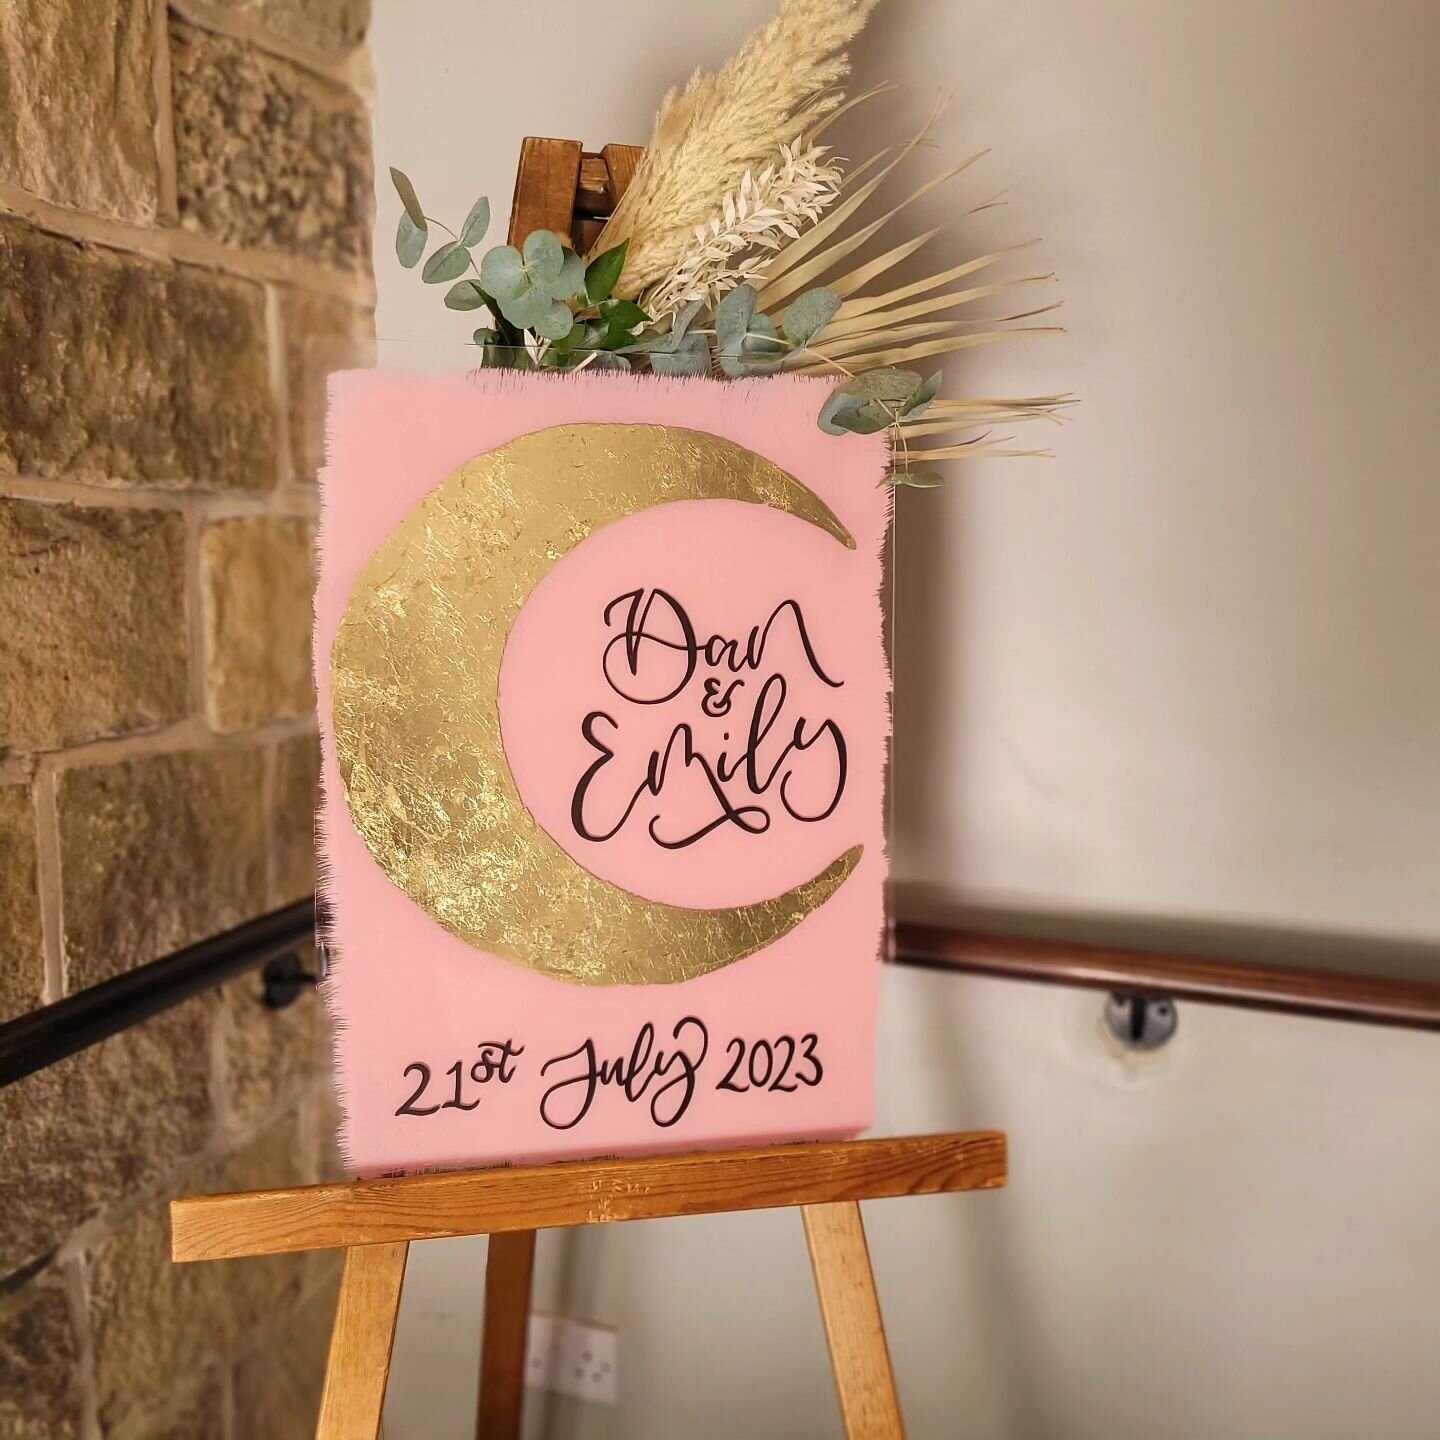 🌜Let's flashback to this wonder of a welcome sign 

- a gold leaf moon, black calligraphy on aceylic with a pink paint background 🥰 - such a beautiful bold greeting for guests! 

@emily.kate.x
@cameraman_dan

Dried foliage styling by @emilykwedding